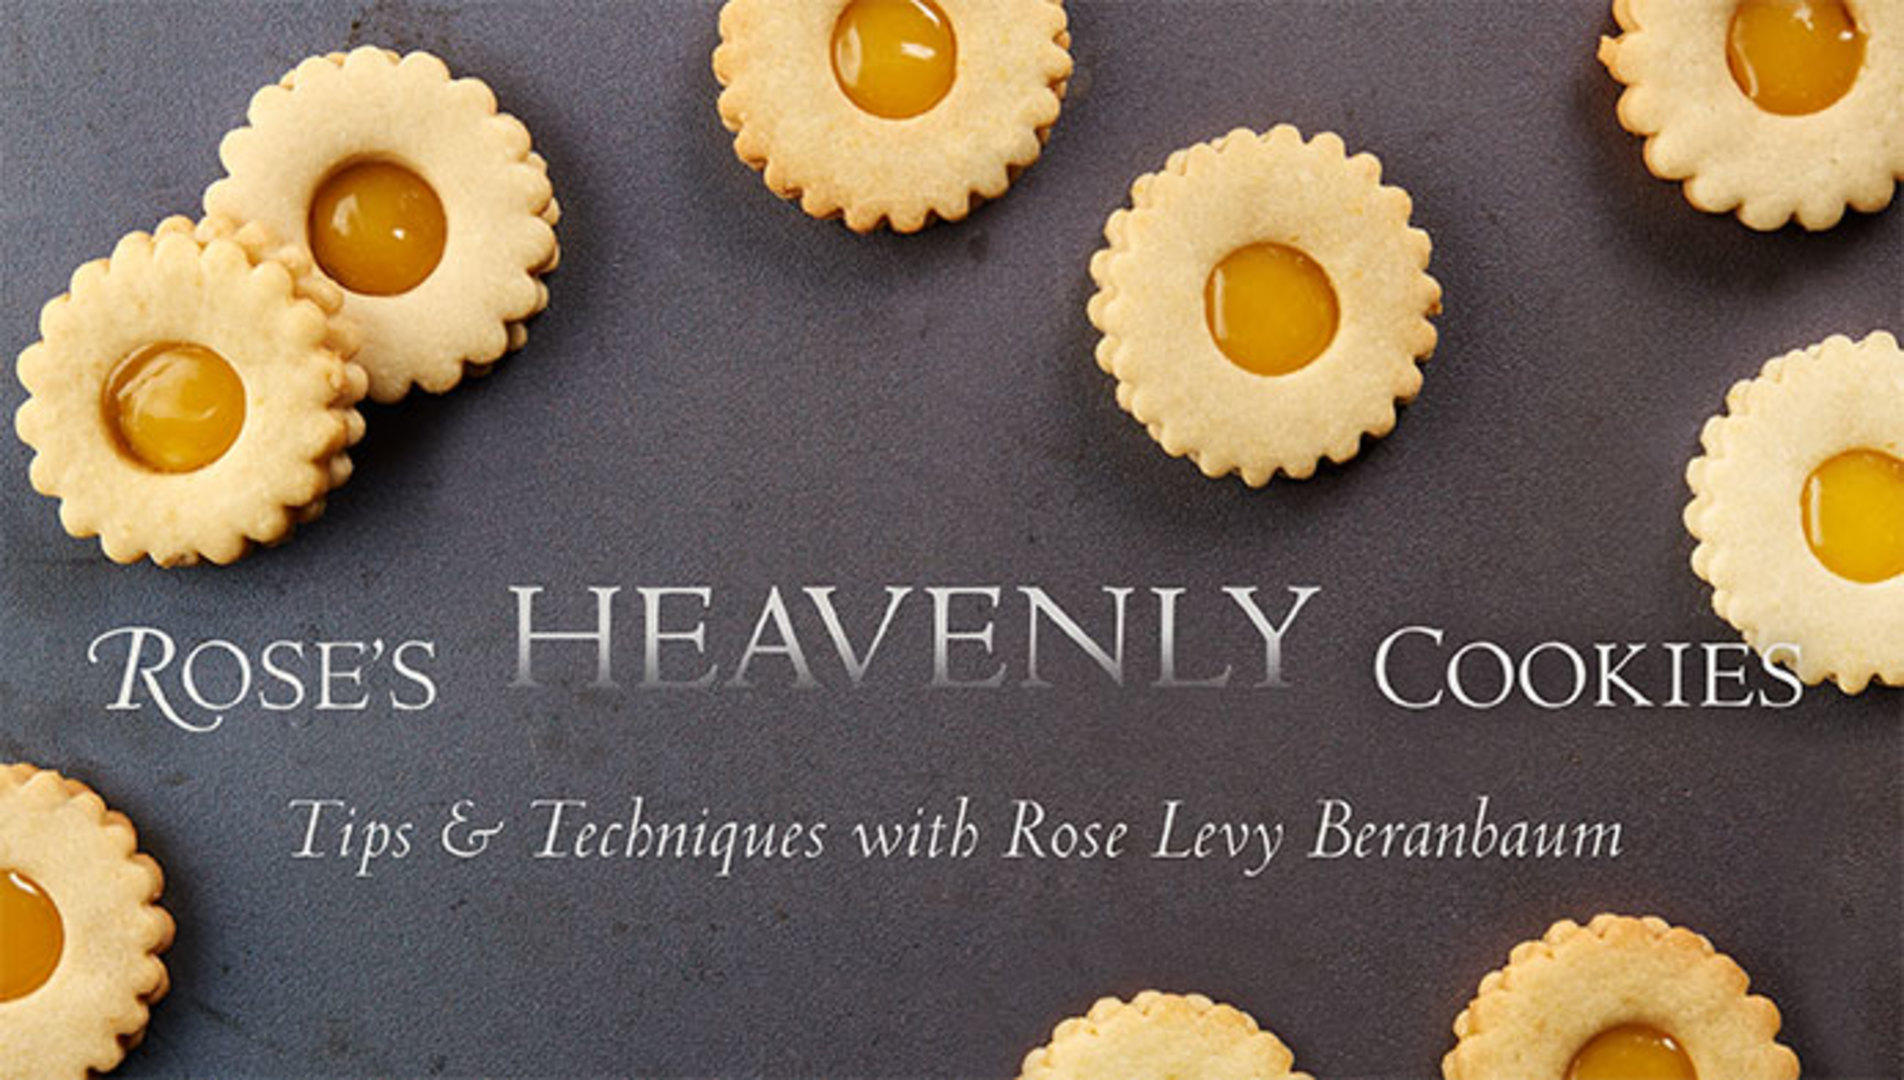 Rose's Heavenly Cookies: Tips & Techniques | Craftsy